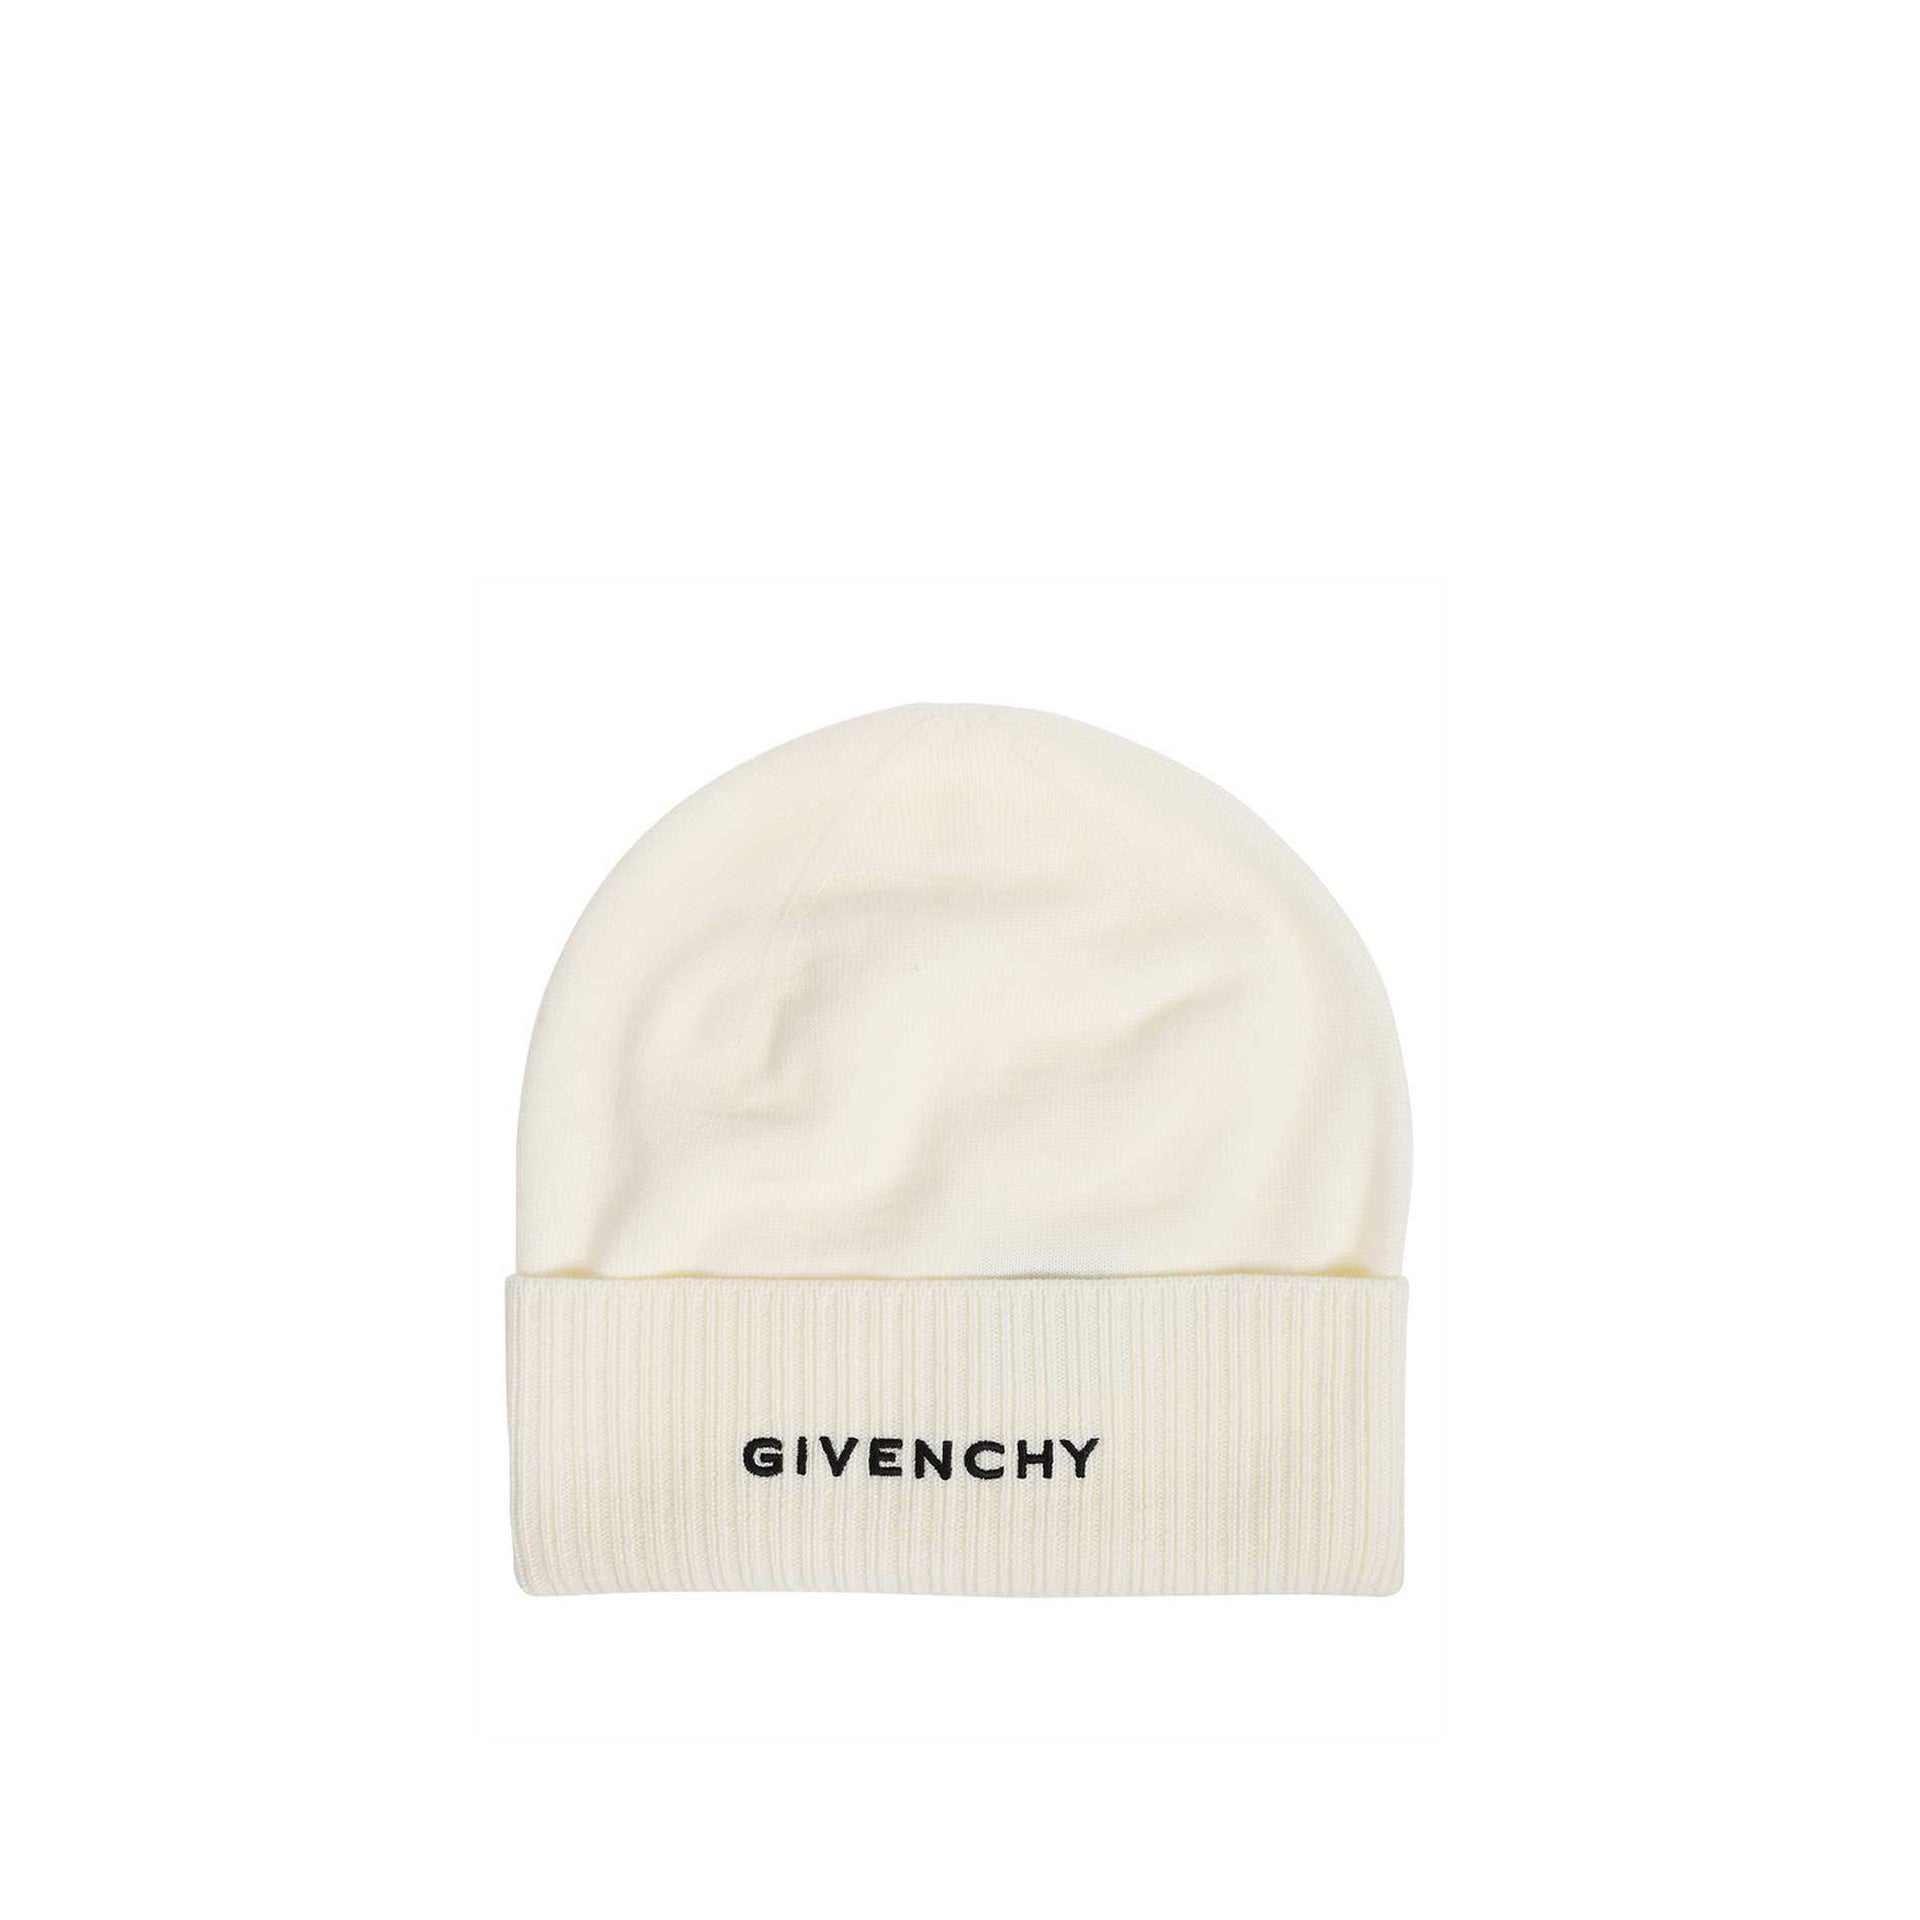 GIVENCHY-OUTLET-SALE-Givenchy-Wool-Logo-Hat-Hute-CREAM-UNI-ARCHIVE-COLLECTION_fffde48b-2c07-49c8-9ccb-0f9ff4162600.jpg